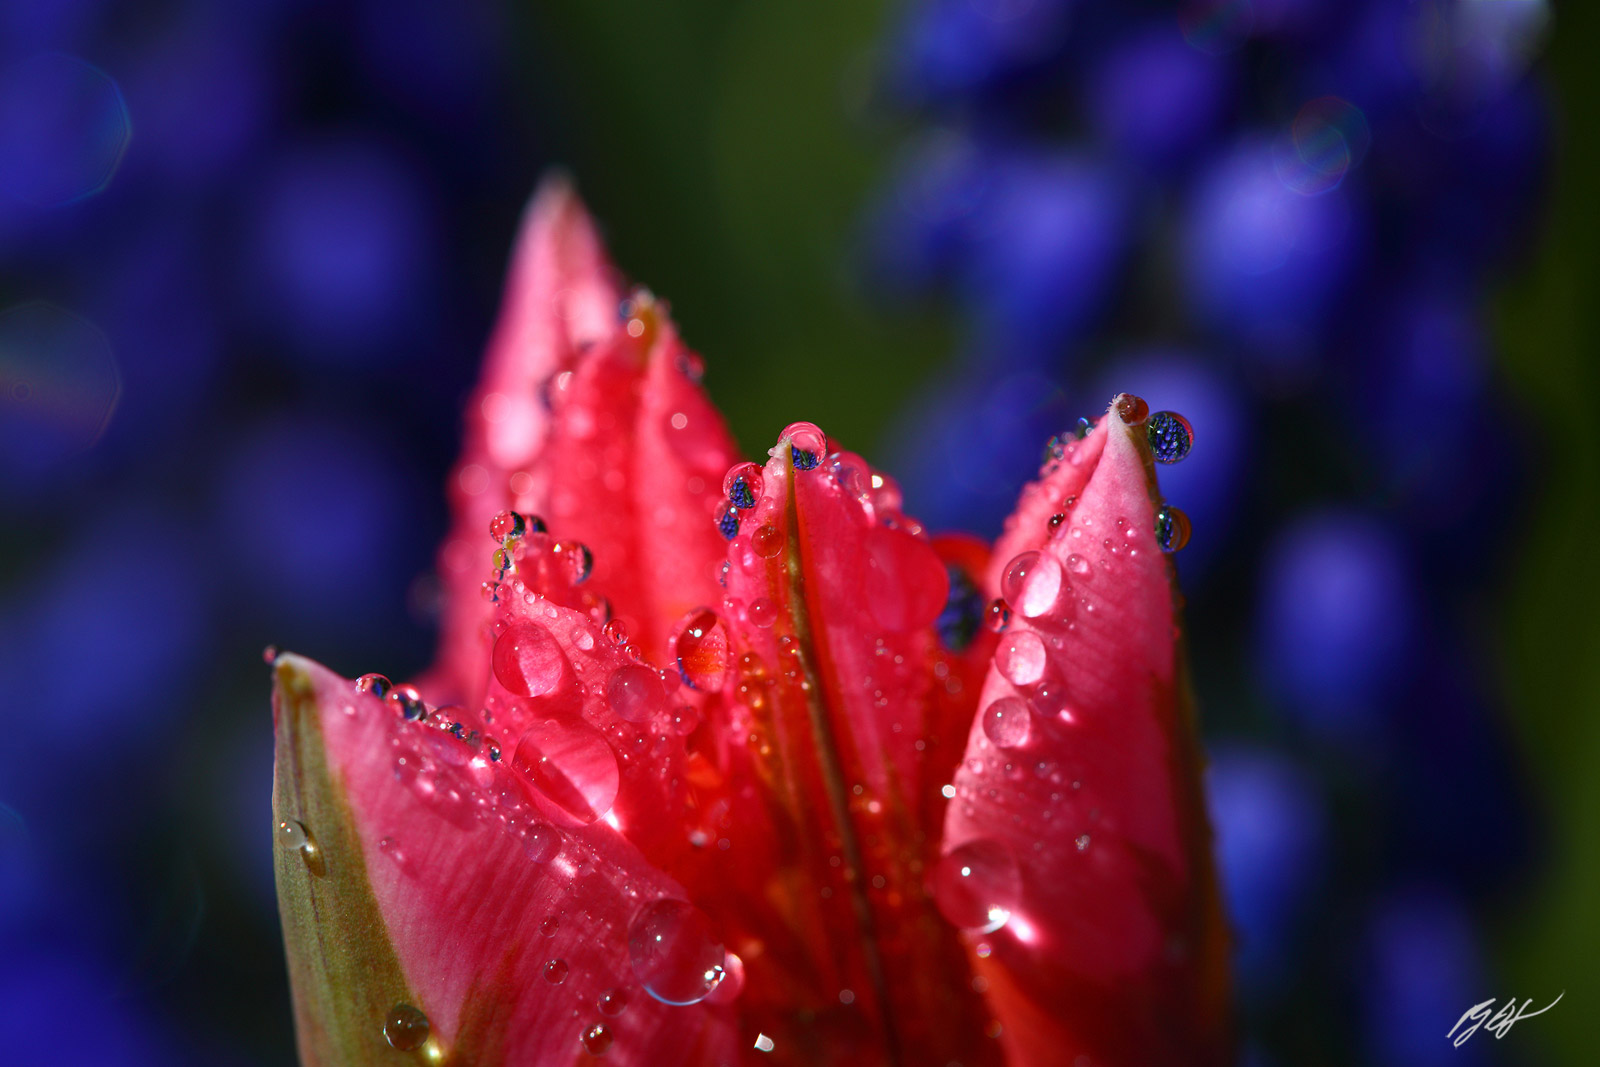 Flowers Captured inside Raindrops on a Tulip in the Roozengaarde Gardens in Skagit Valley in Washington